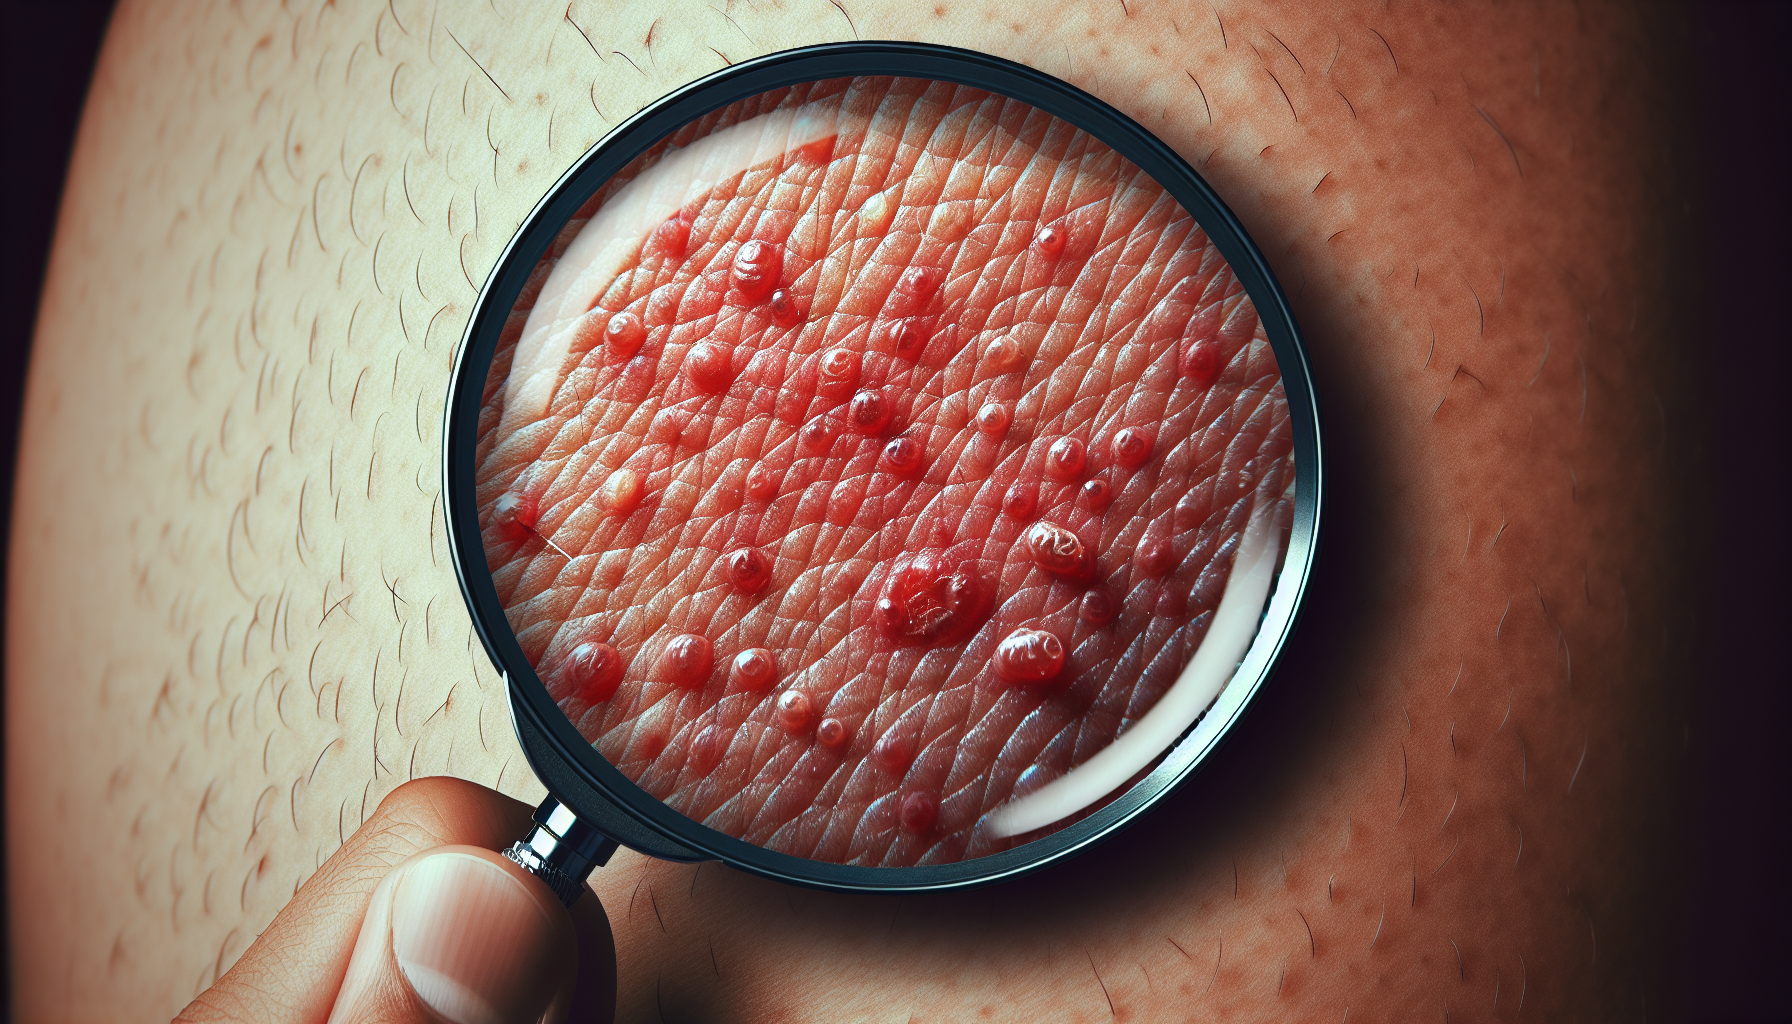 How Can I Check If I Have Scabies?